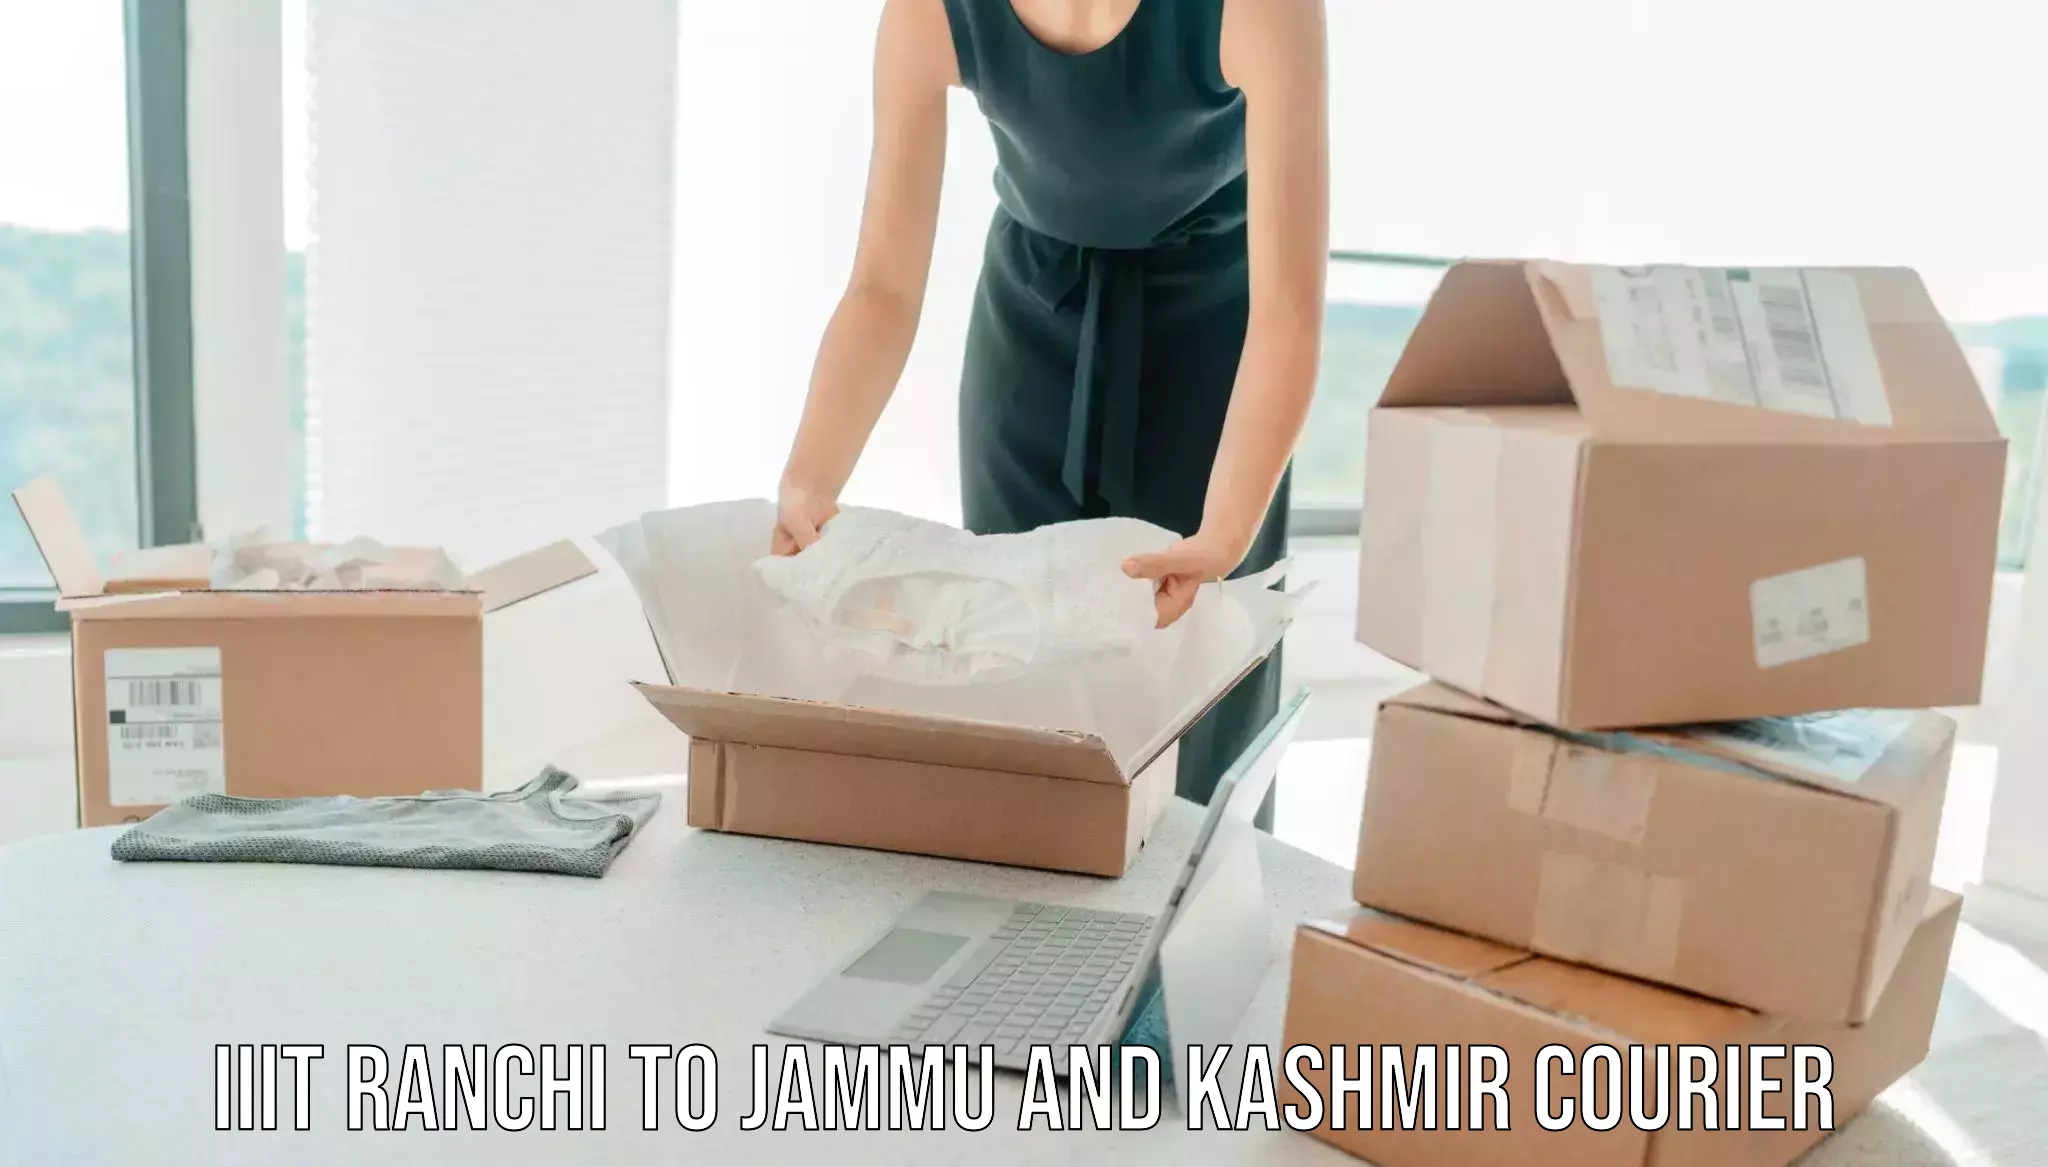 Trusted moving company IIIT Ranchi to Bhaderwah